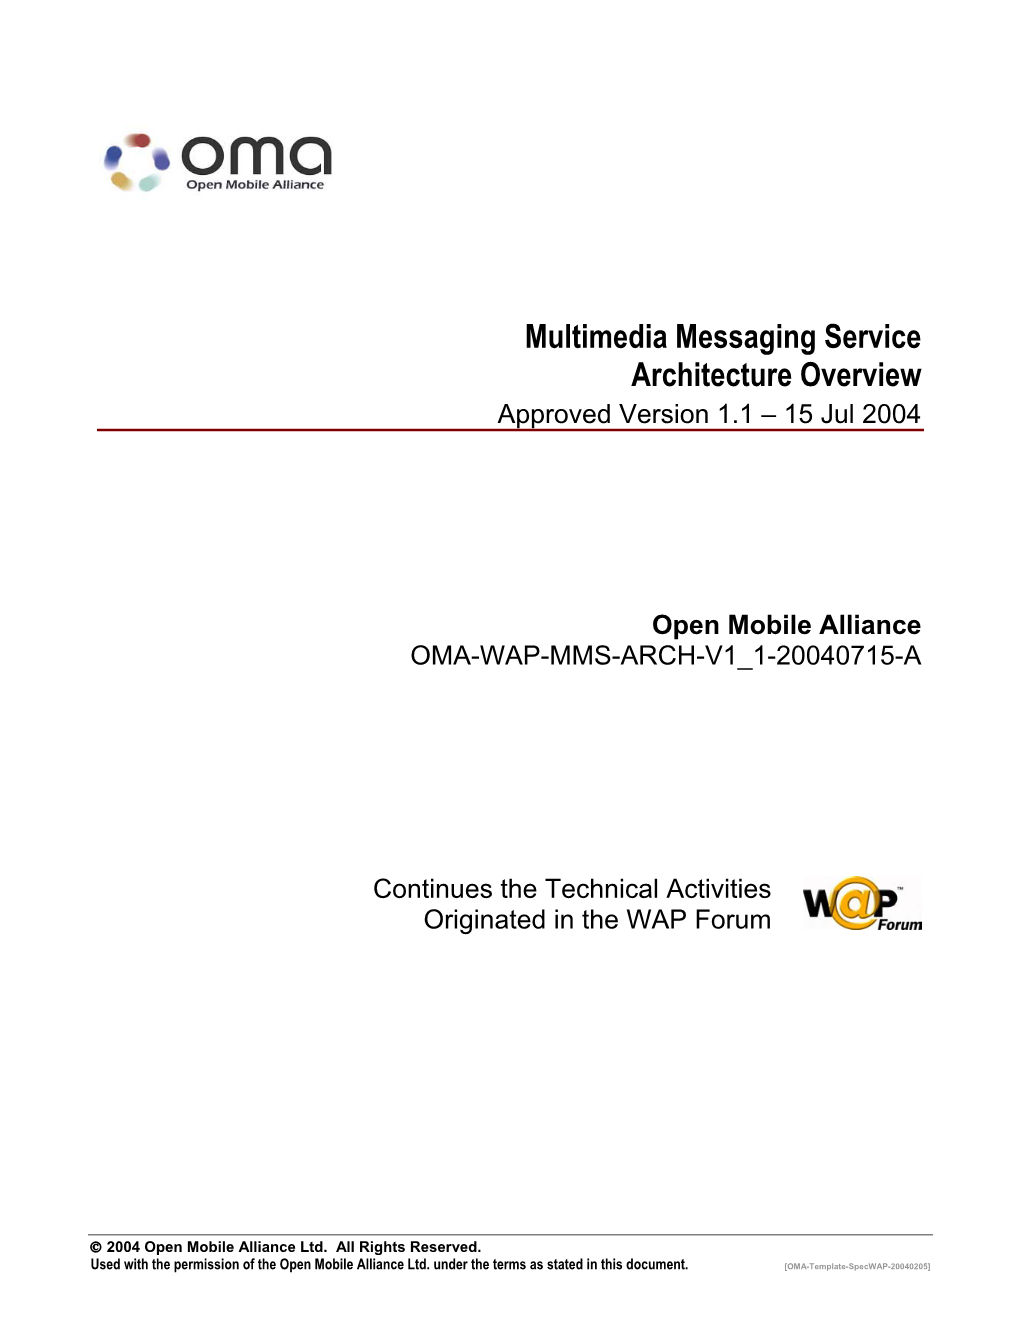 Multimedia Messaging Service Architecture Overview Approved Version 1.1 – 15 Jul 2004